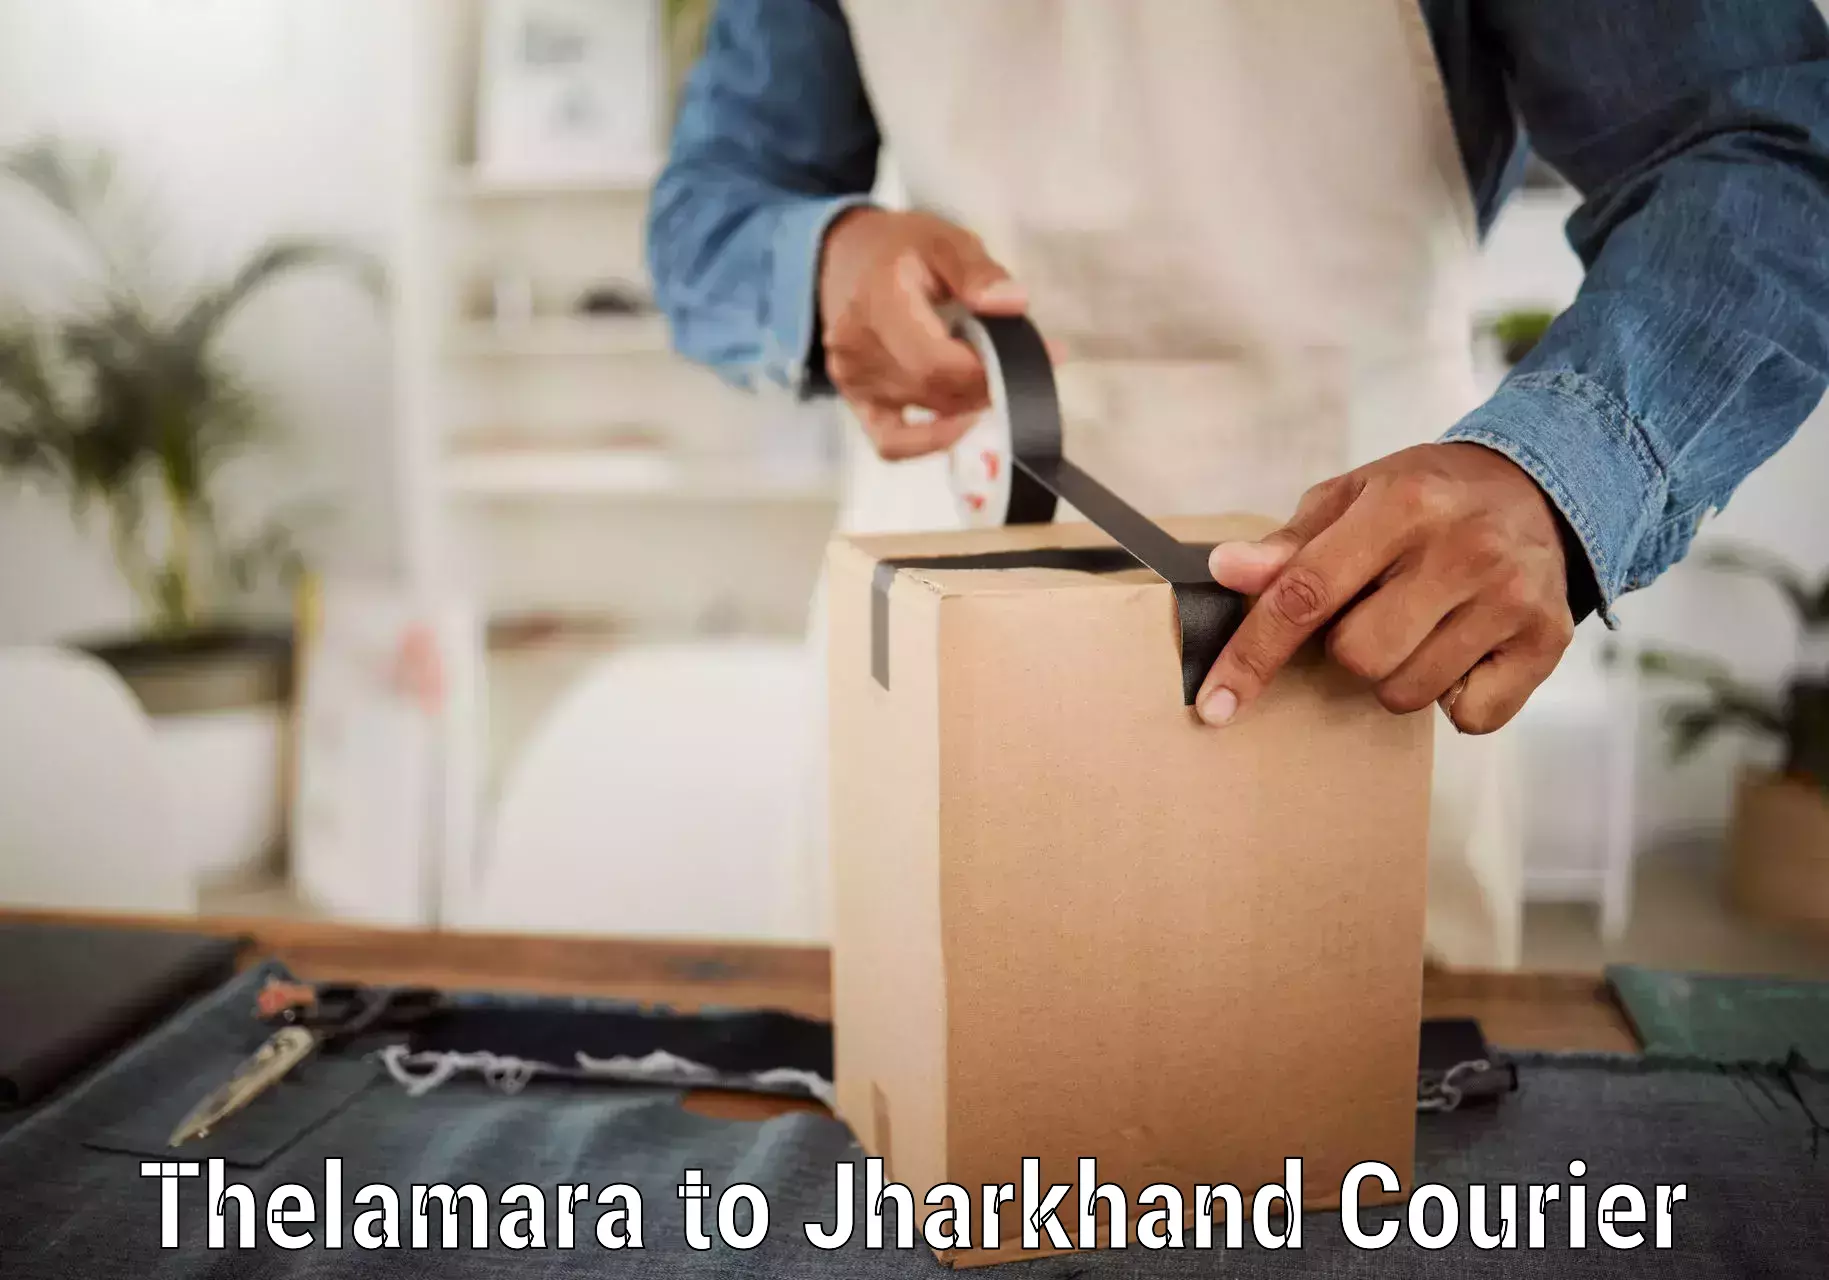 Reliable courier services Thelamara to Jharia